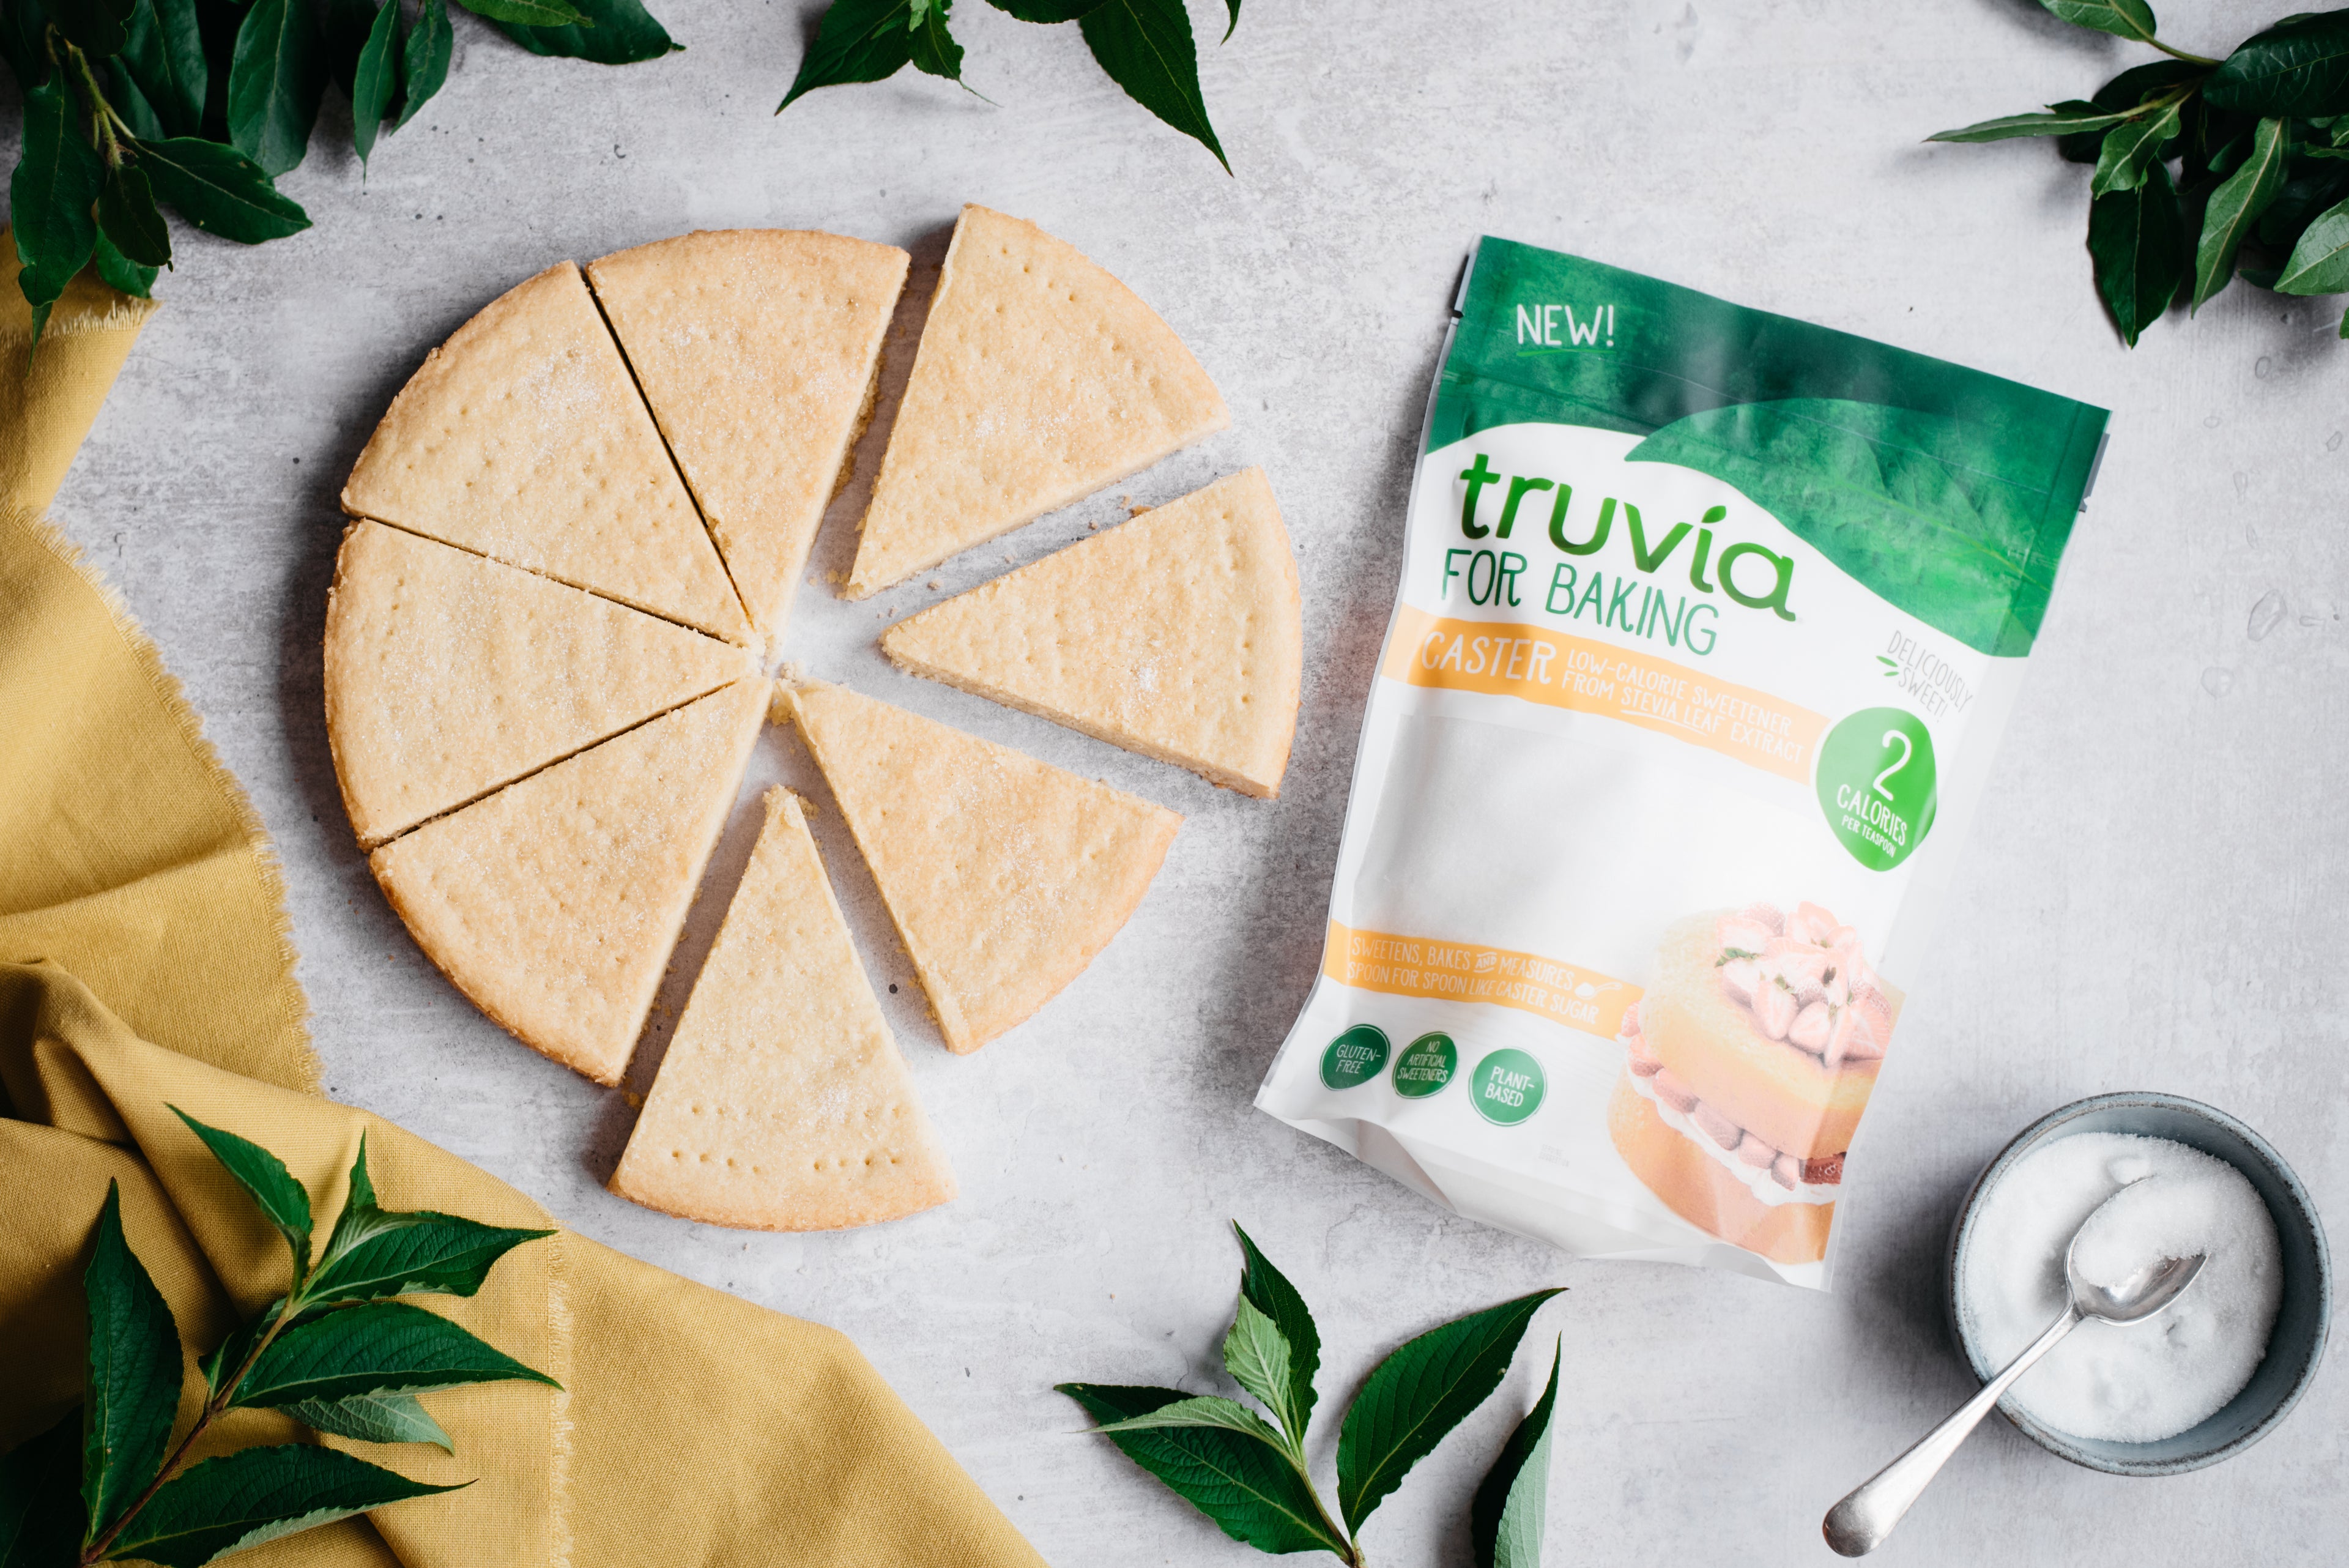 Top down view of a batch of healthy shortbread next to a bag of truvia for baking caster sugar